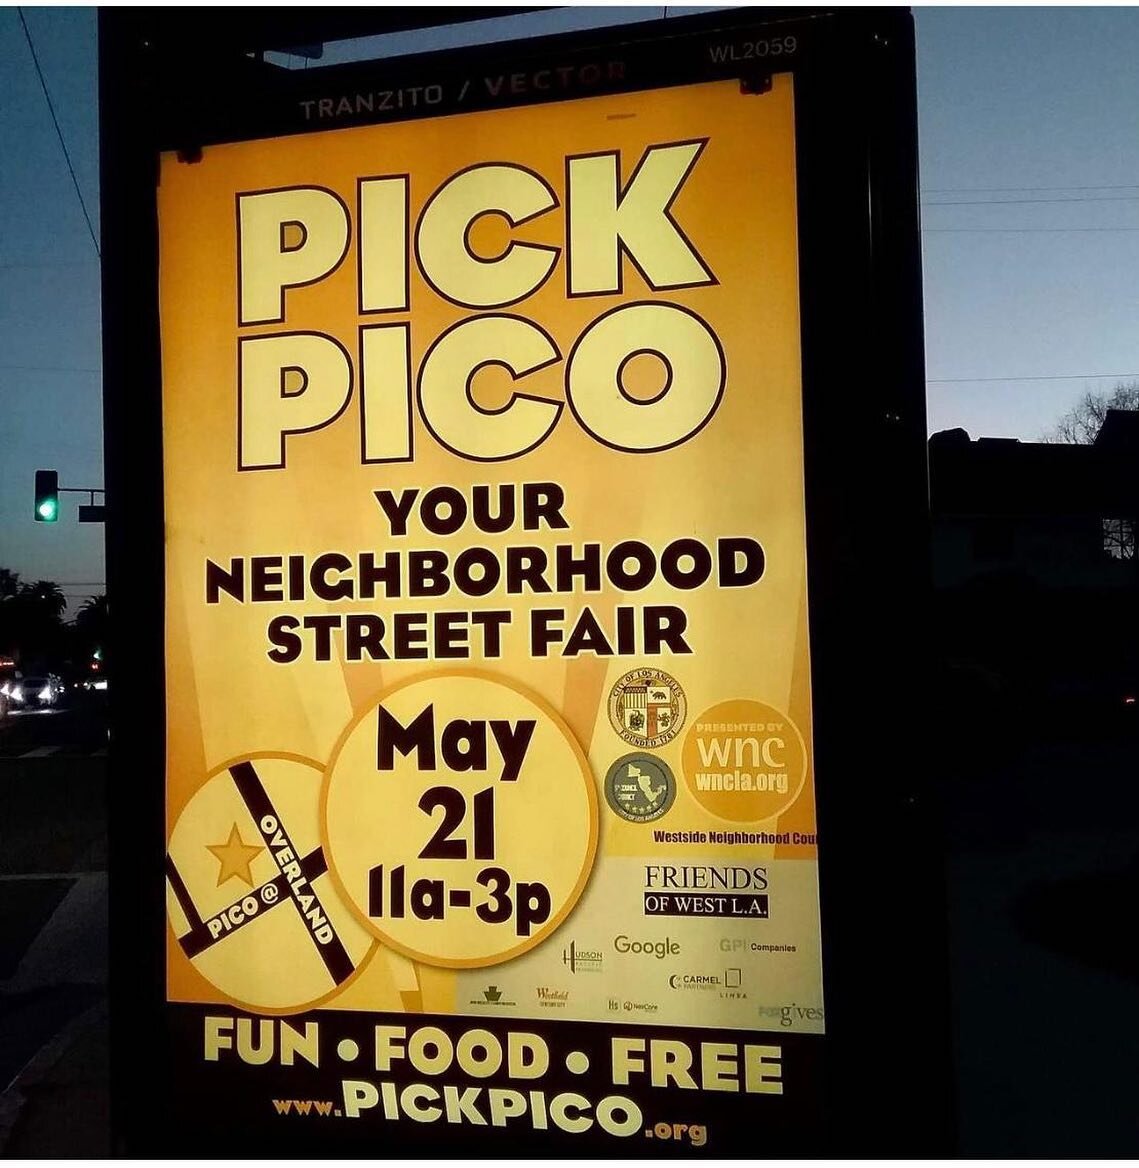 Calling All Students!
Join us for the neighborhood street fair!

Sunday, May 21
11am - 11:40 Dance with Wil

Pico &amp; Overland. Mainstage.

#Fitness #MentalWellness #Community #NeighborhoodFair #Pico #LosAngeles #WestLA #Westwood #FunThingsToDo #St